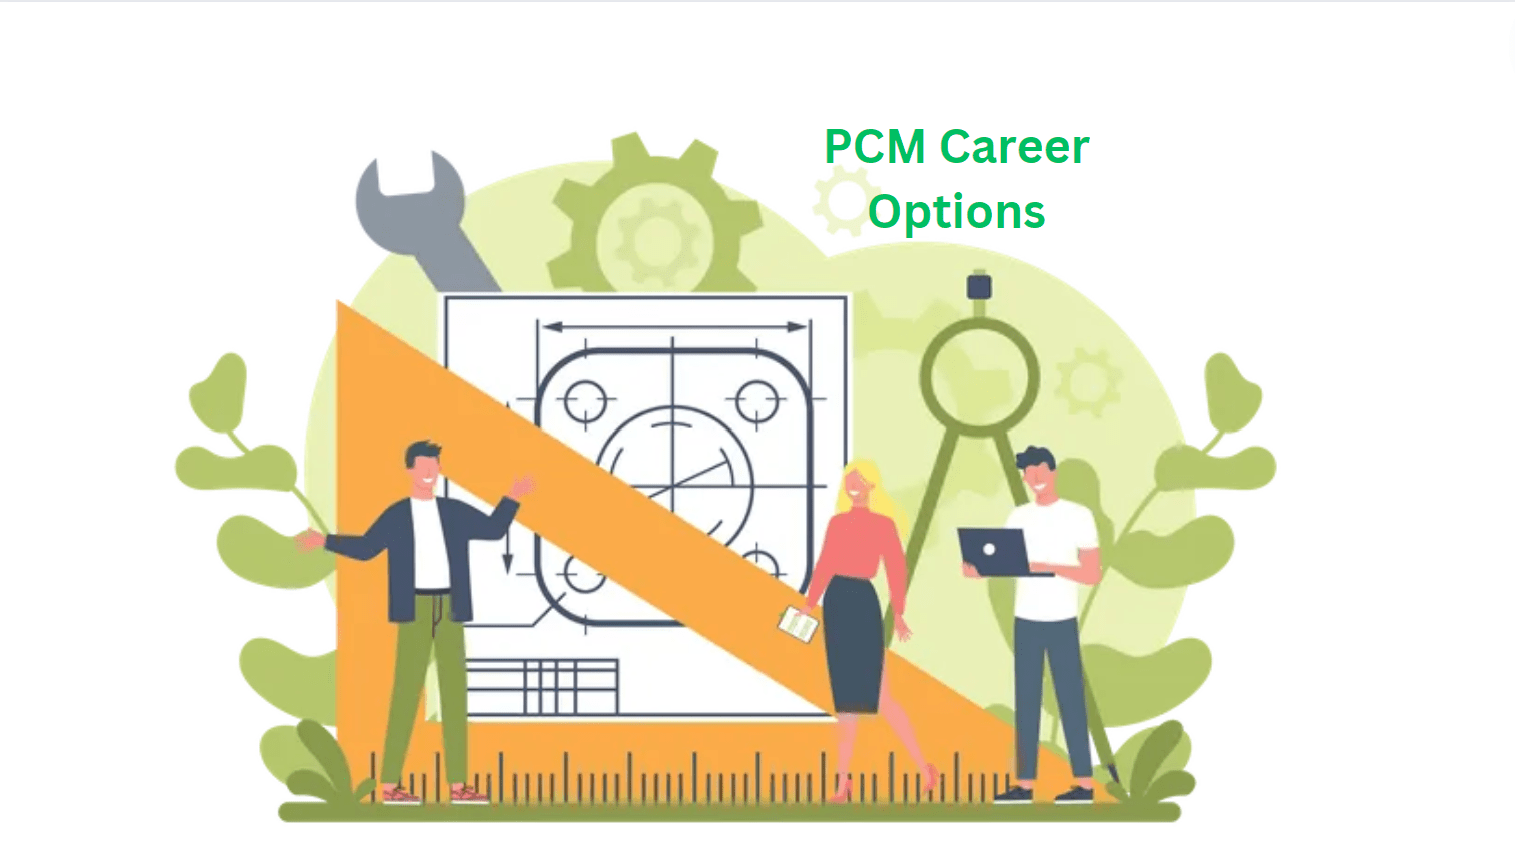 pcm career options after 12th science